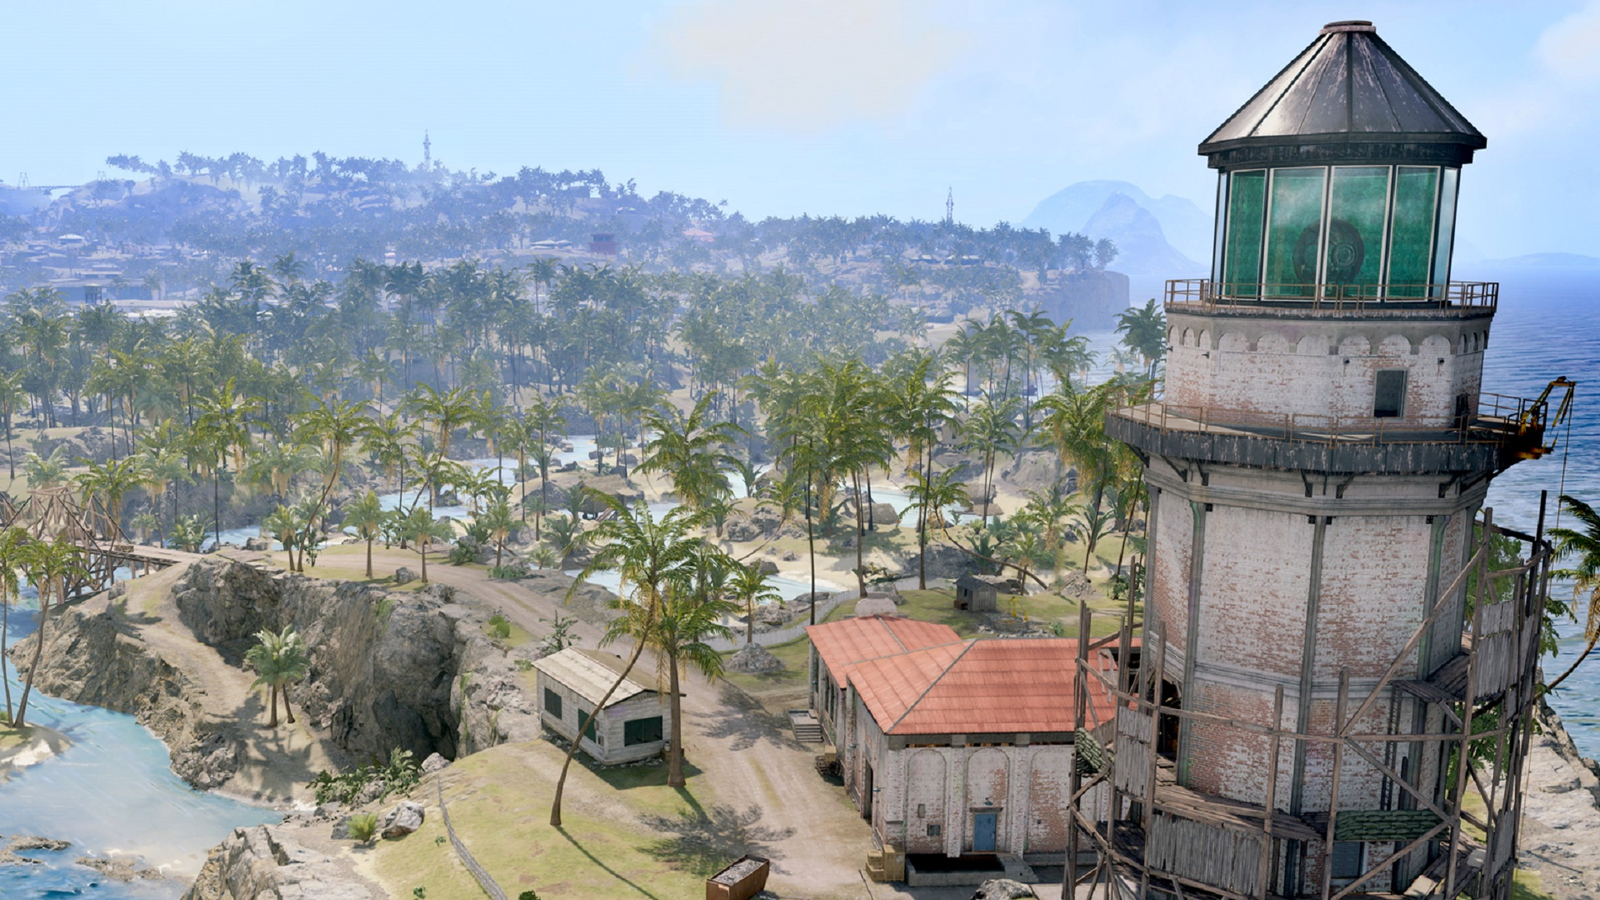 Call of Duty: Warzone' Caldera map release date, overview, and details